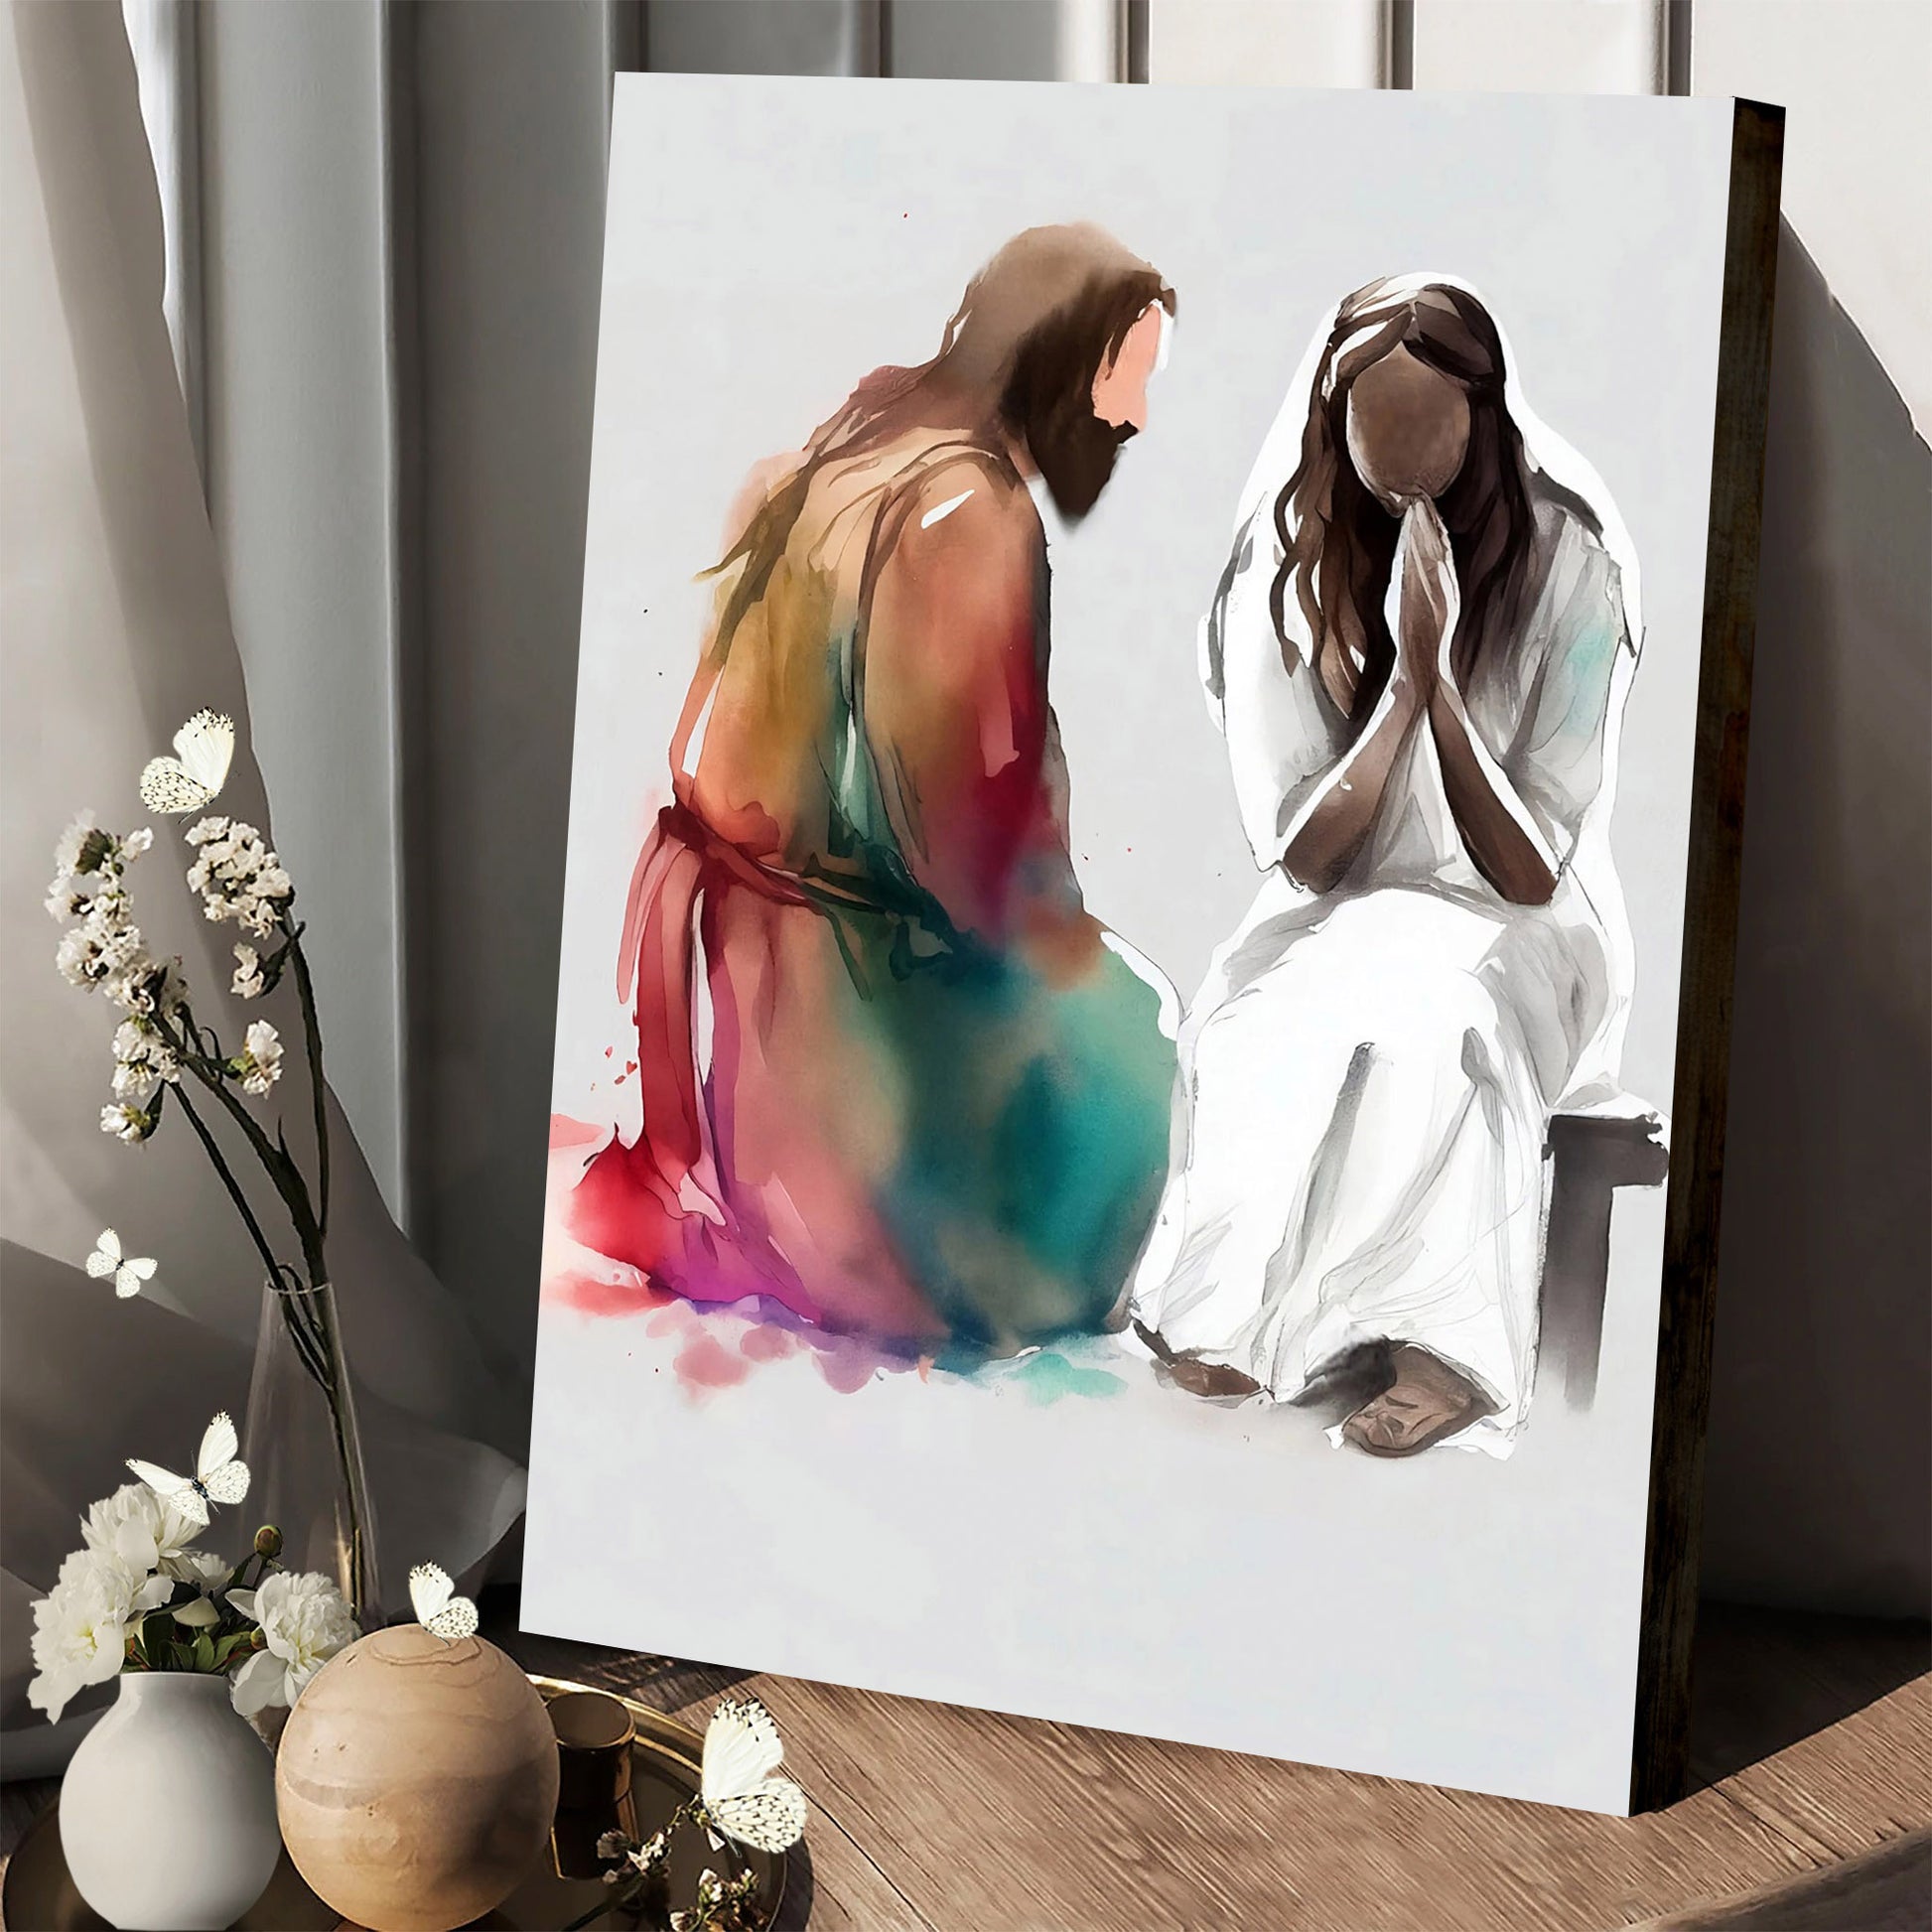 Jesus Christ Holding A Woman Watercolor Religious Art - Canvas Pictures - Jesus Canvas Art - Christian Wall Art